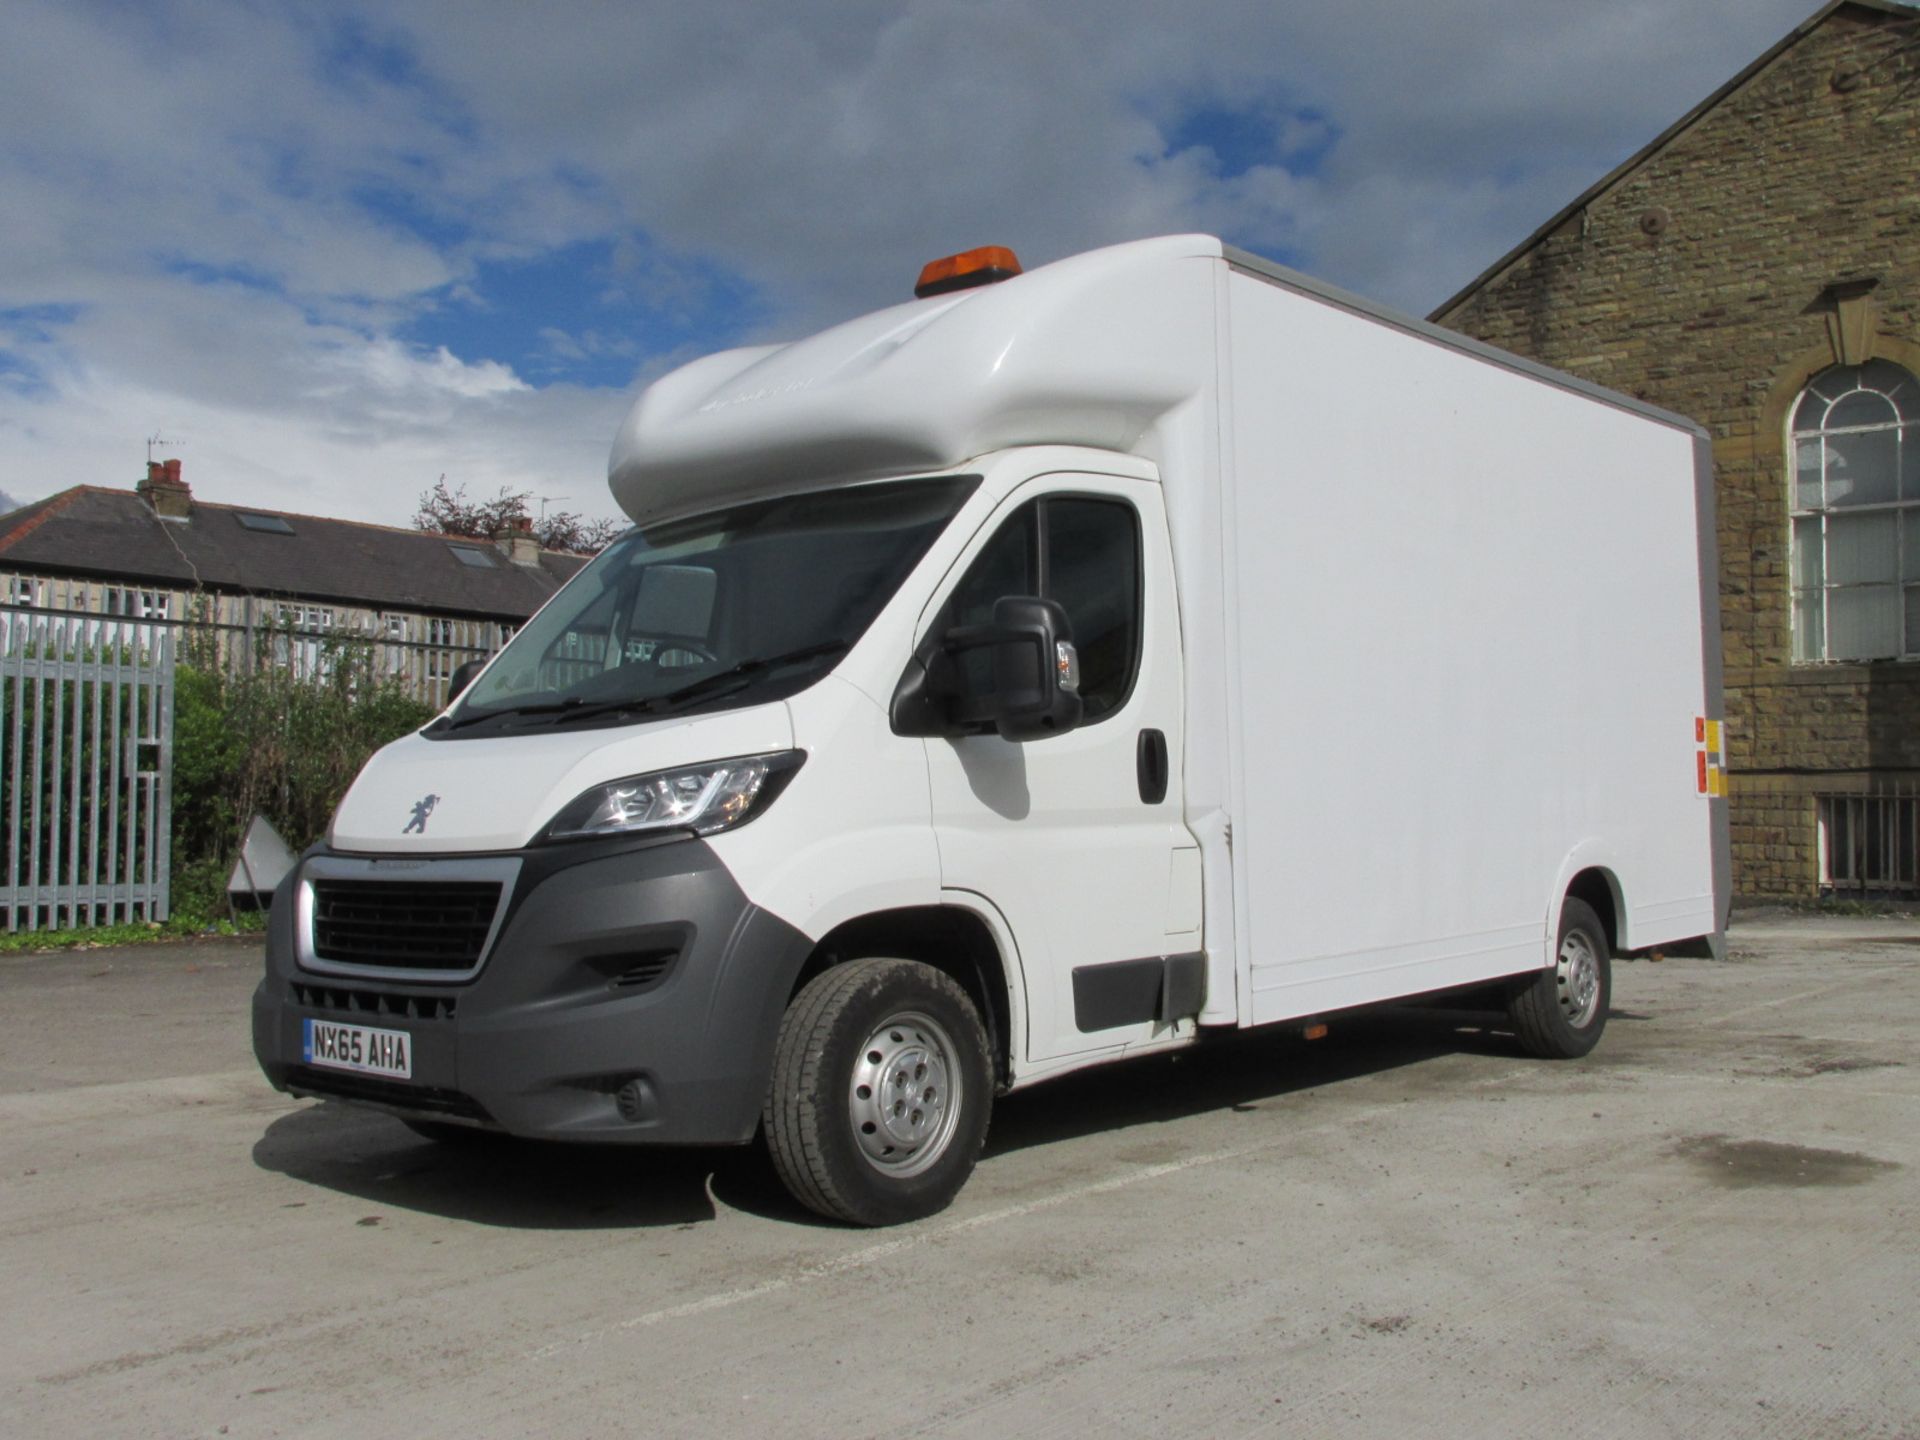 2015 "65 Reg" Peugeot Boxer 4.1m Low Loader Box Van with Dhollandia Tail Lift - over £38k when new